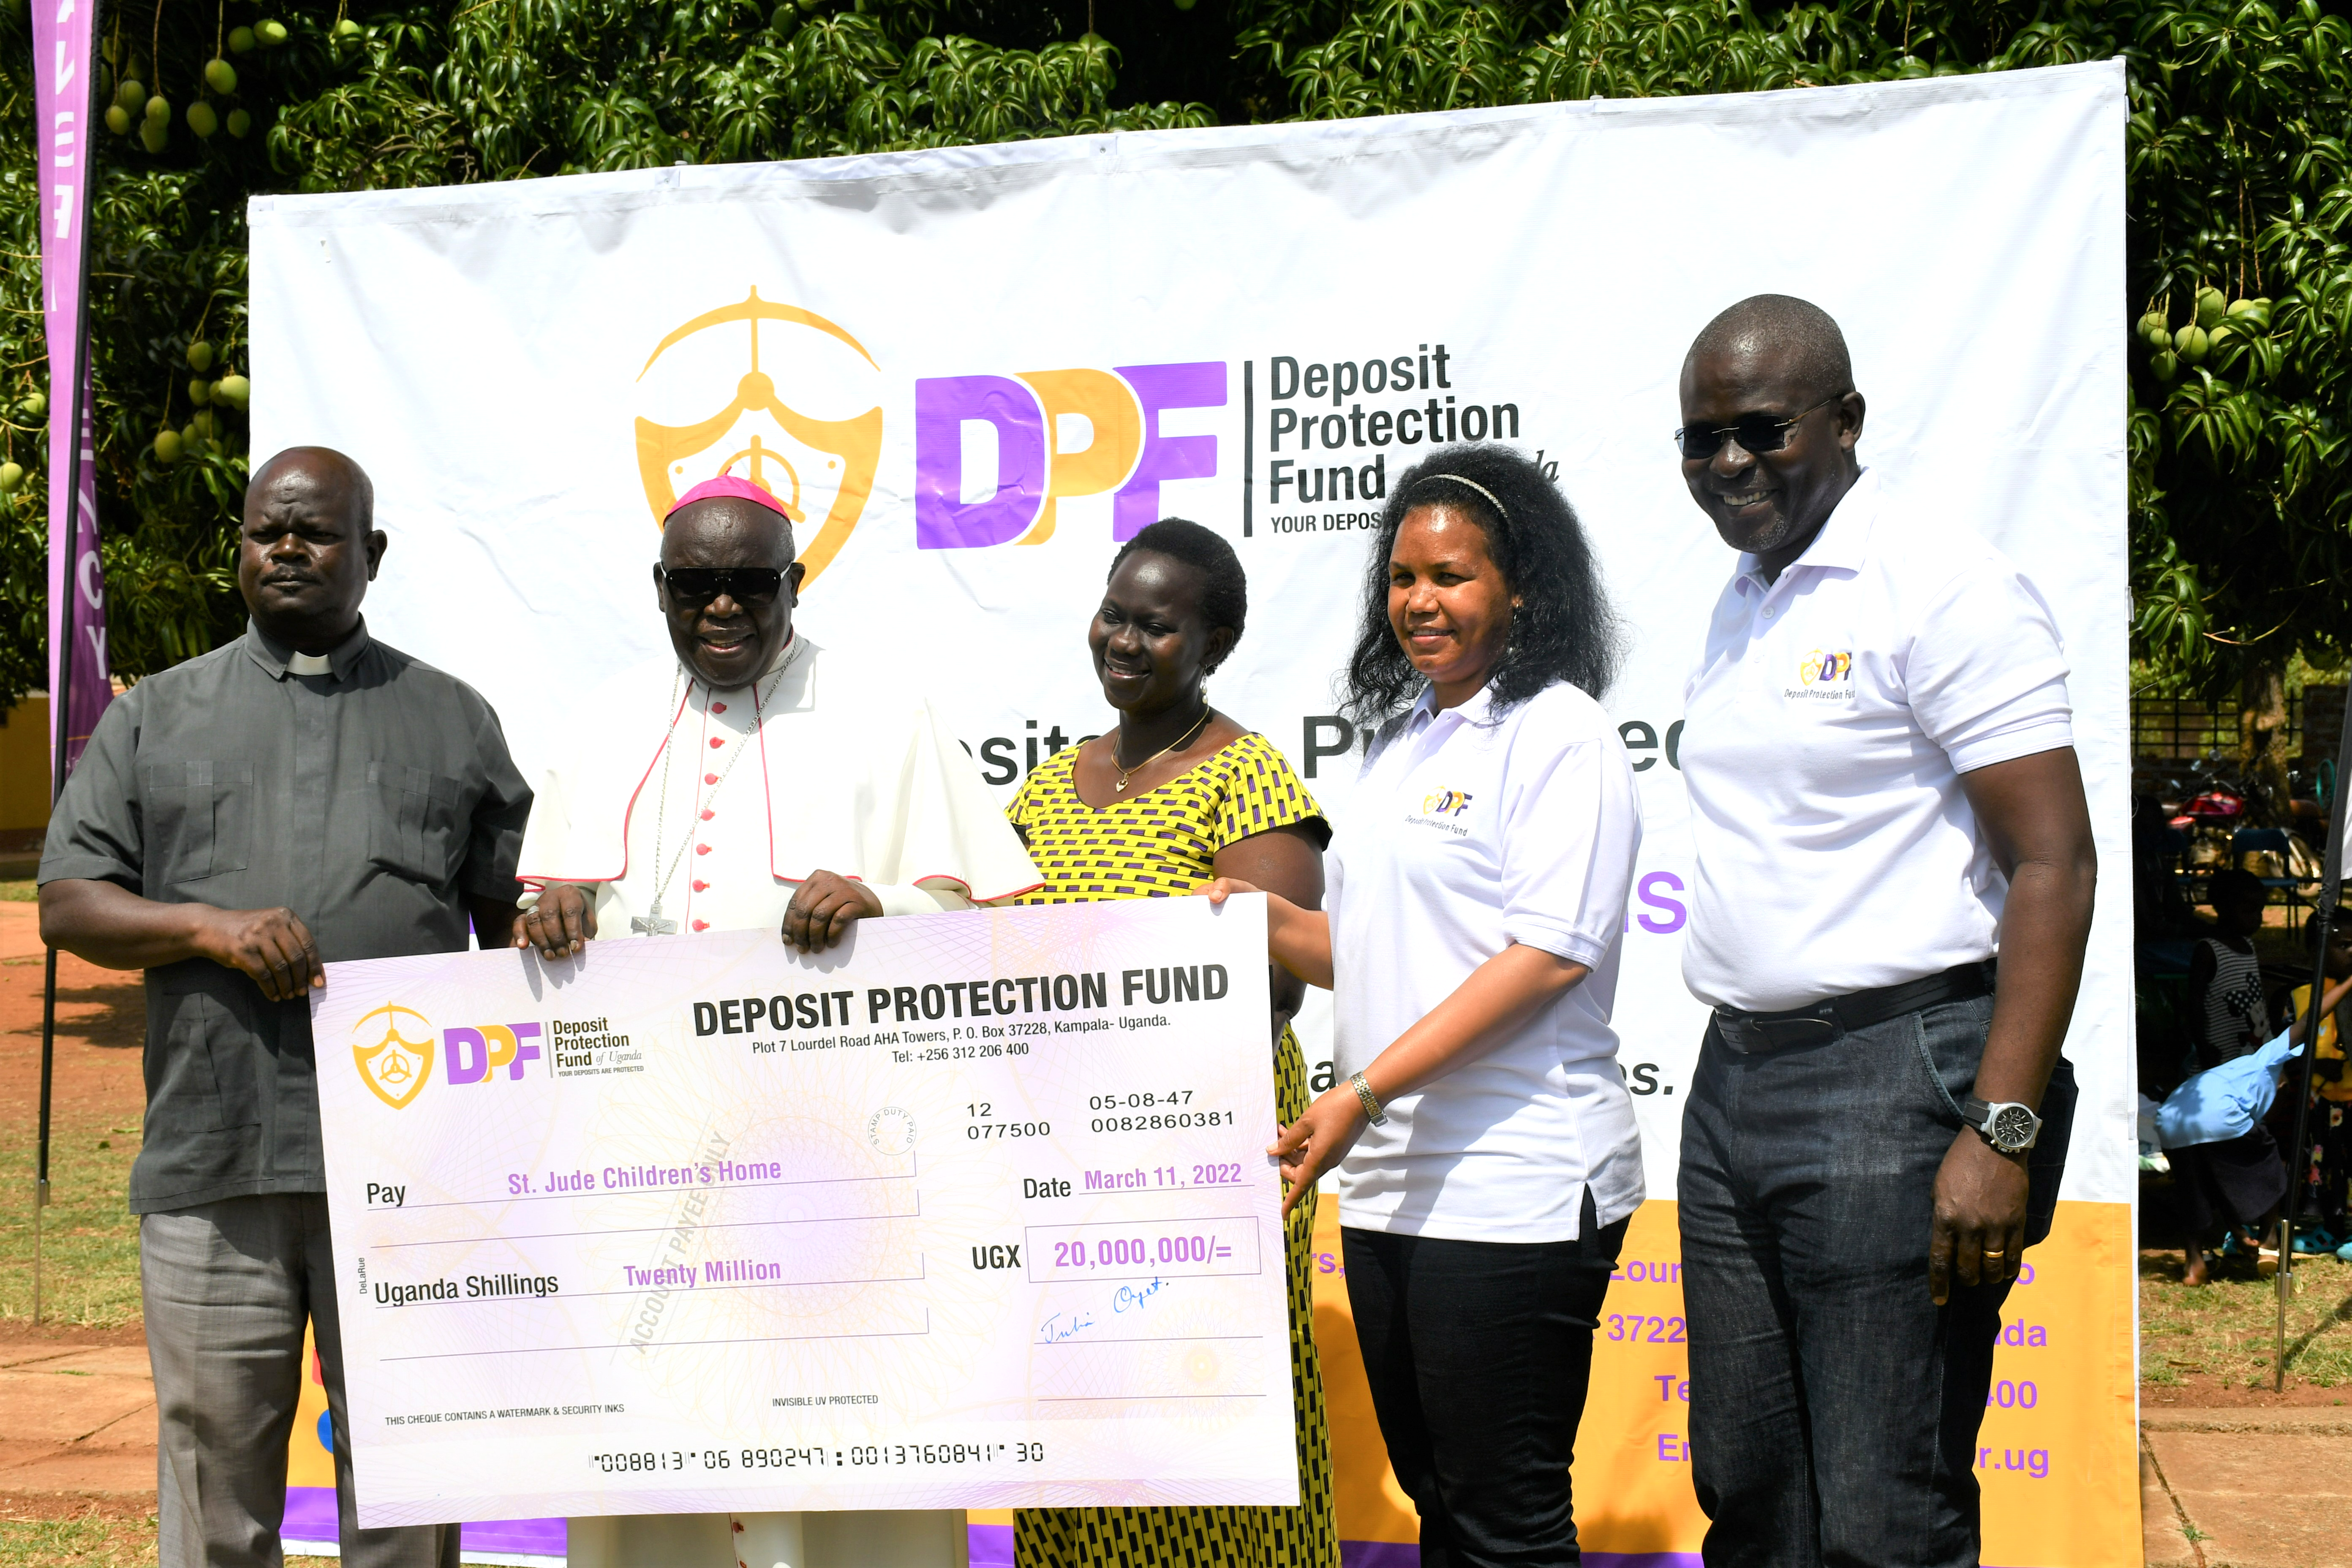 Deposit Protection Fund (DPF) Donates Items Worth UGX 20,000,000 To St. Jude Children’s Home In Gulu